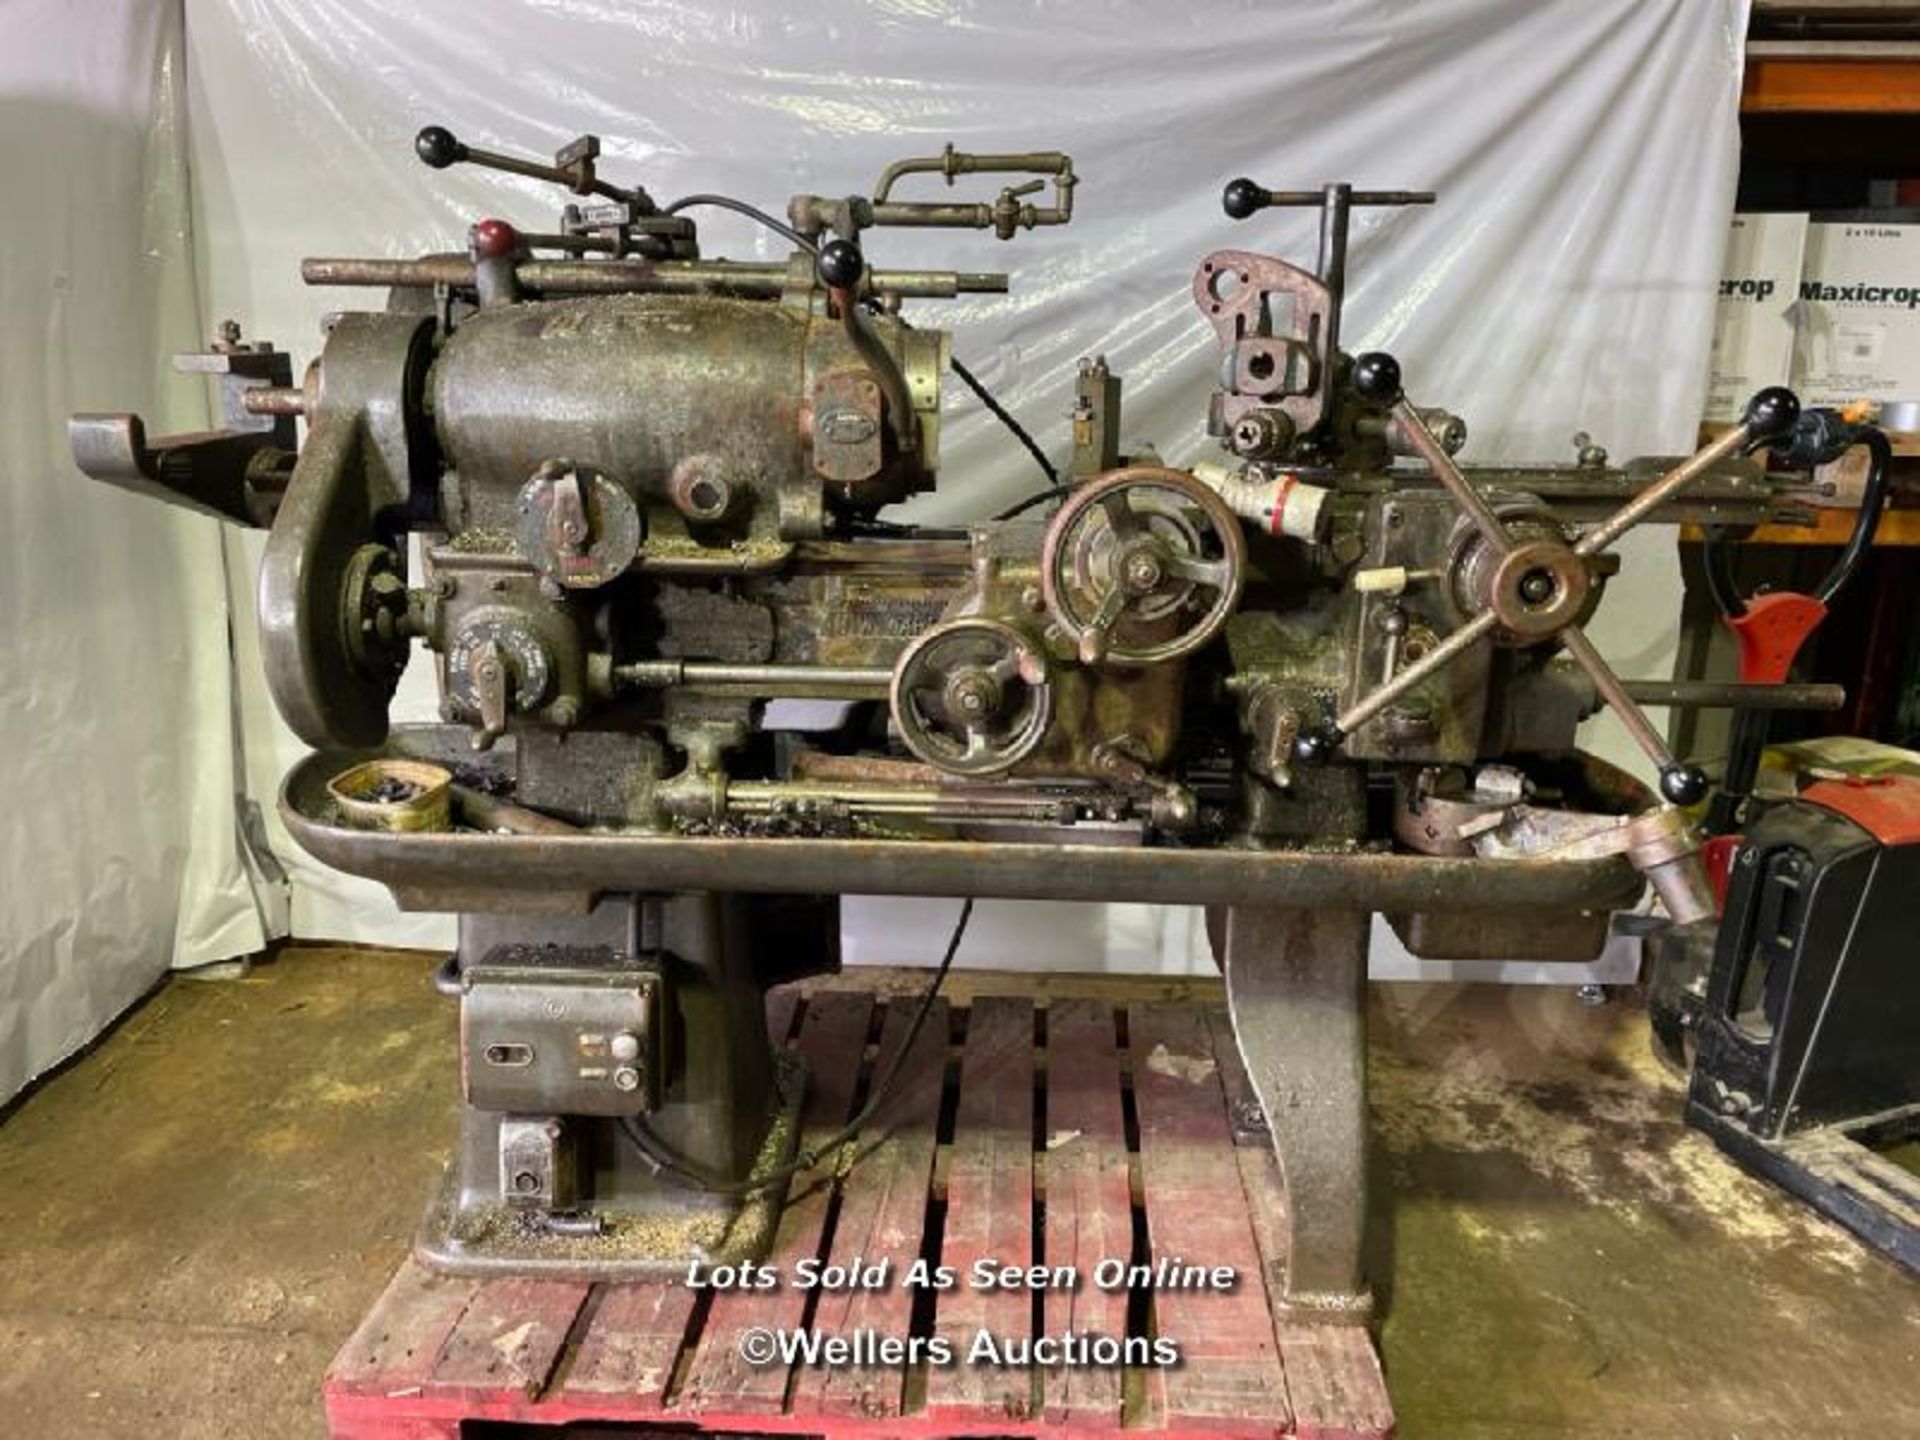 H. W. WARD AND SON CAPSTAN 2A LATHE, 3 PHASE, INCL. 3 JAW CHUCK, IN WORKING ORDER